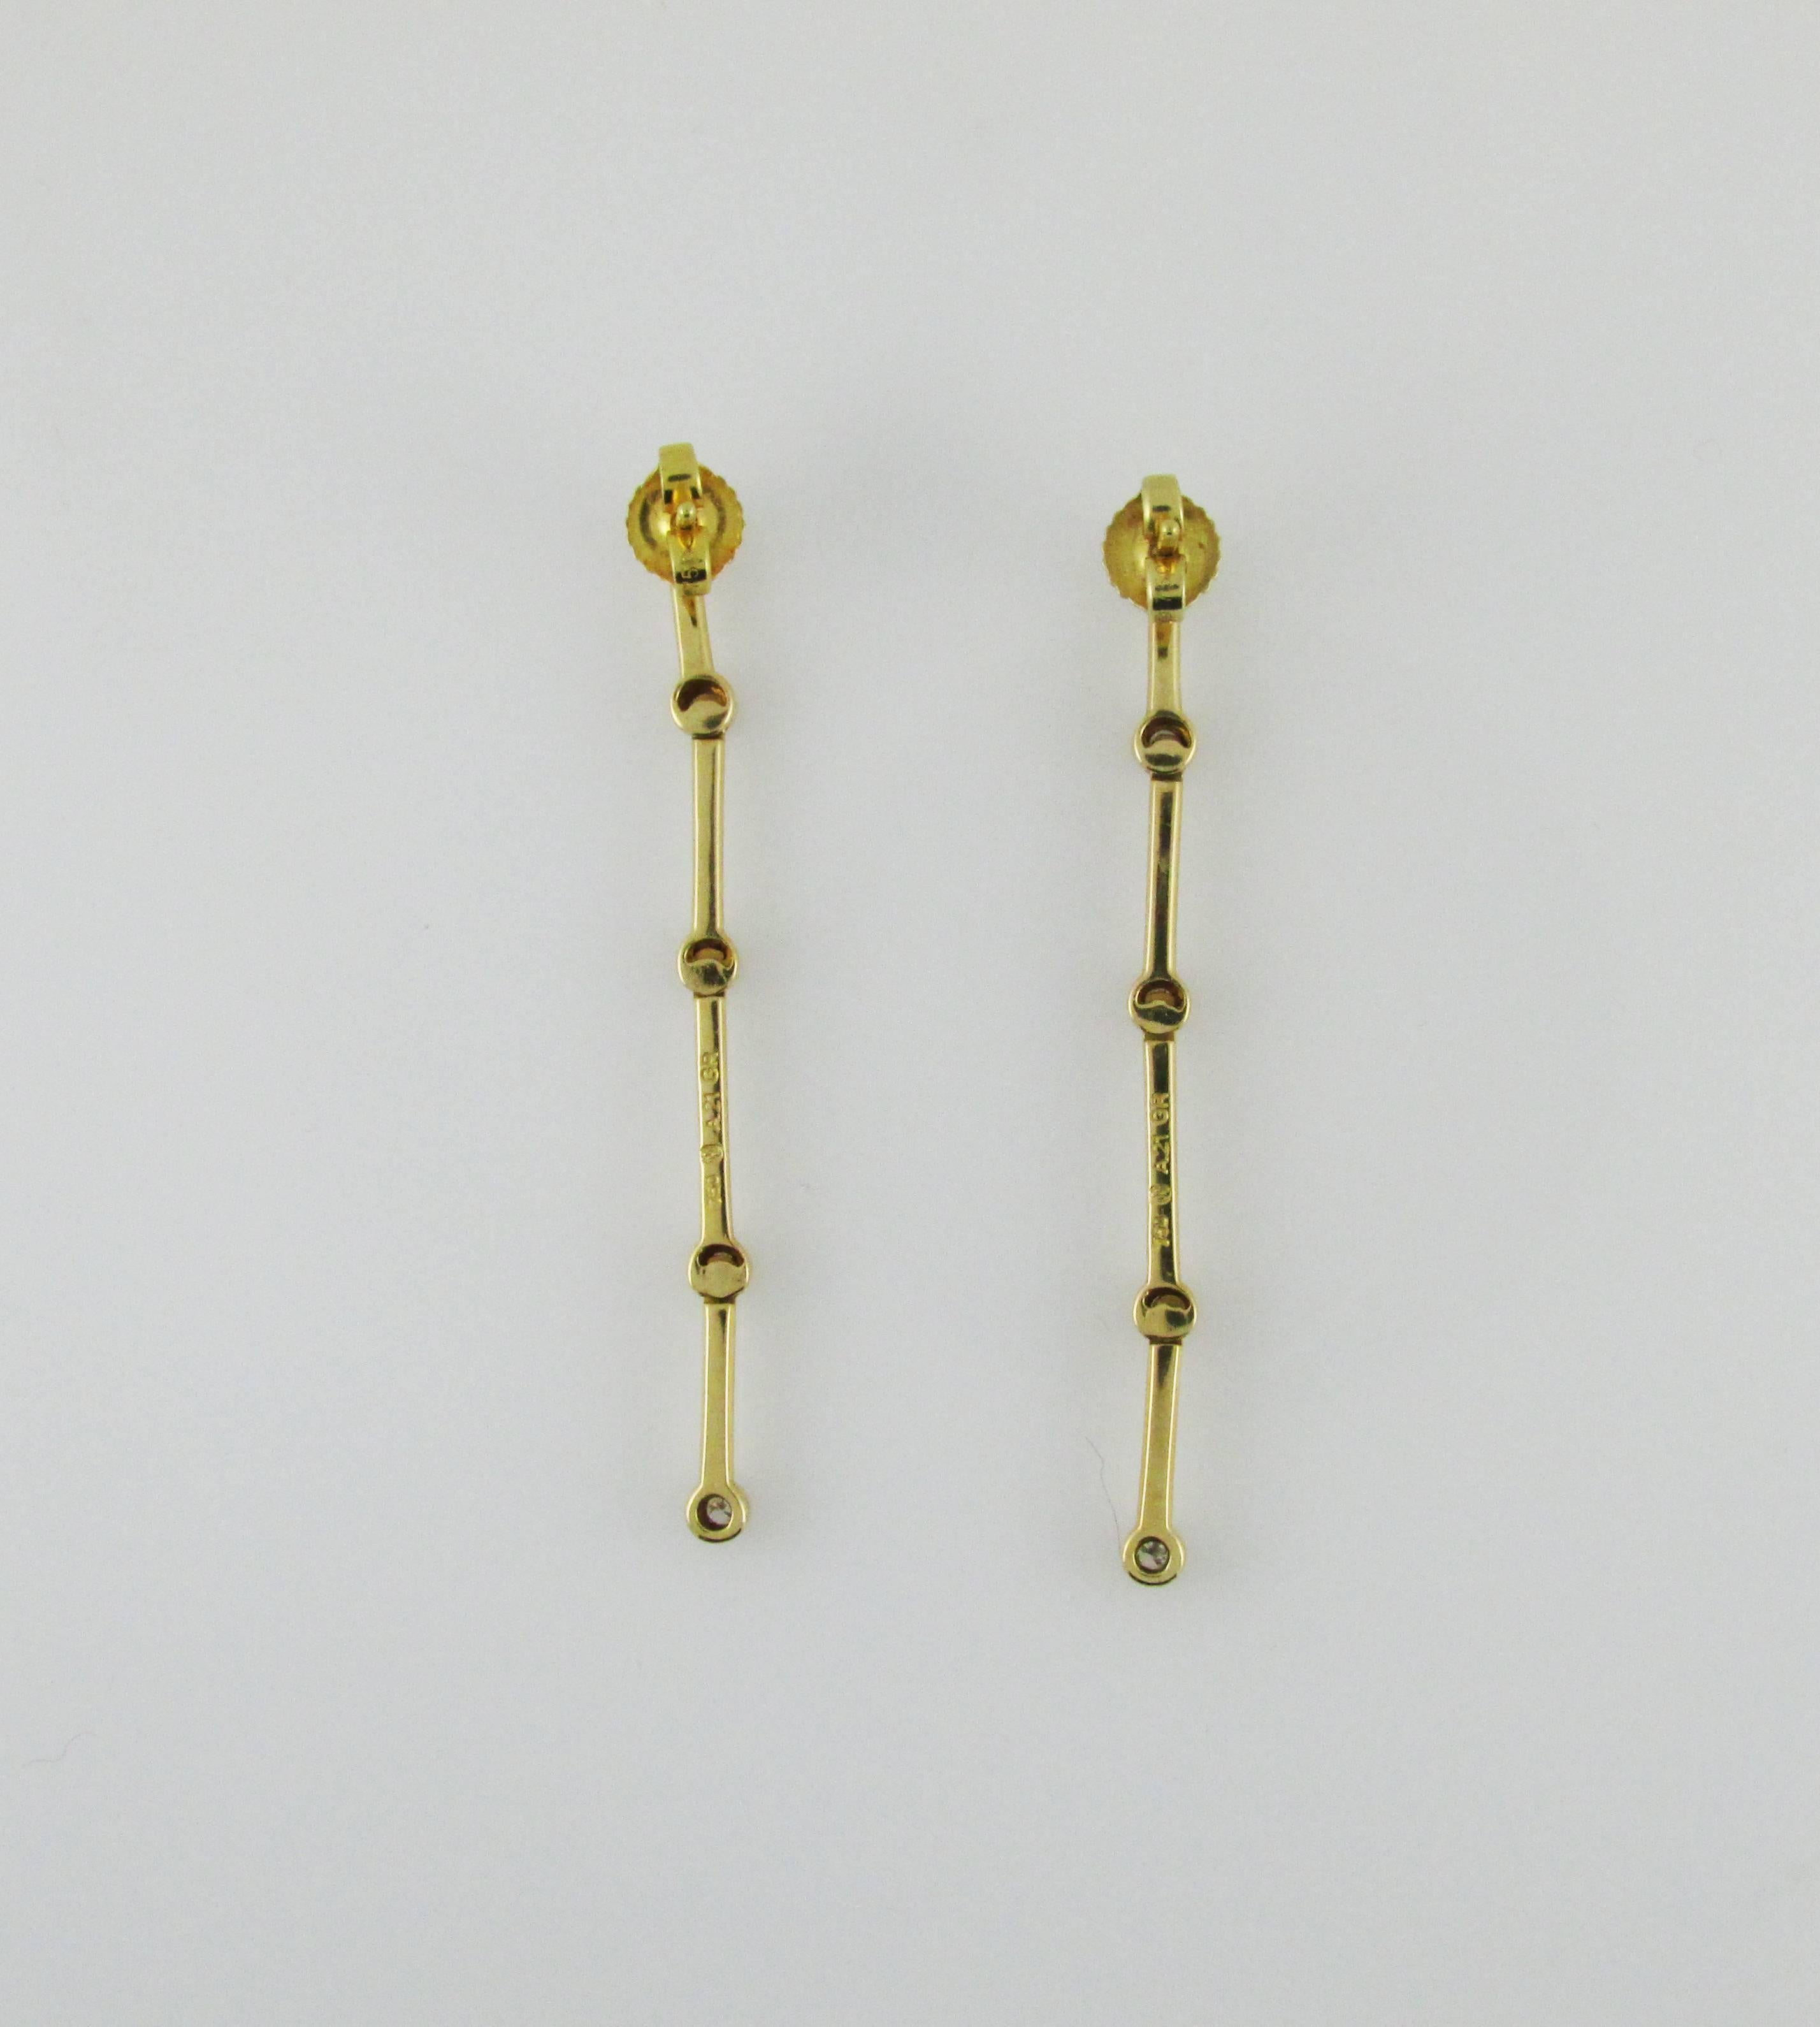 18KT yellow gold and diamond drop earrings. Each earring is bezel set with 5 round diamonds. Post backs. Signed Ilias Lalaounis Greece. 2 inches long.